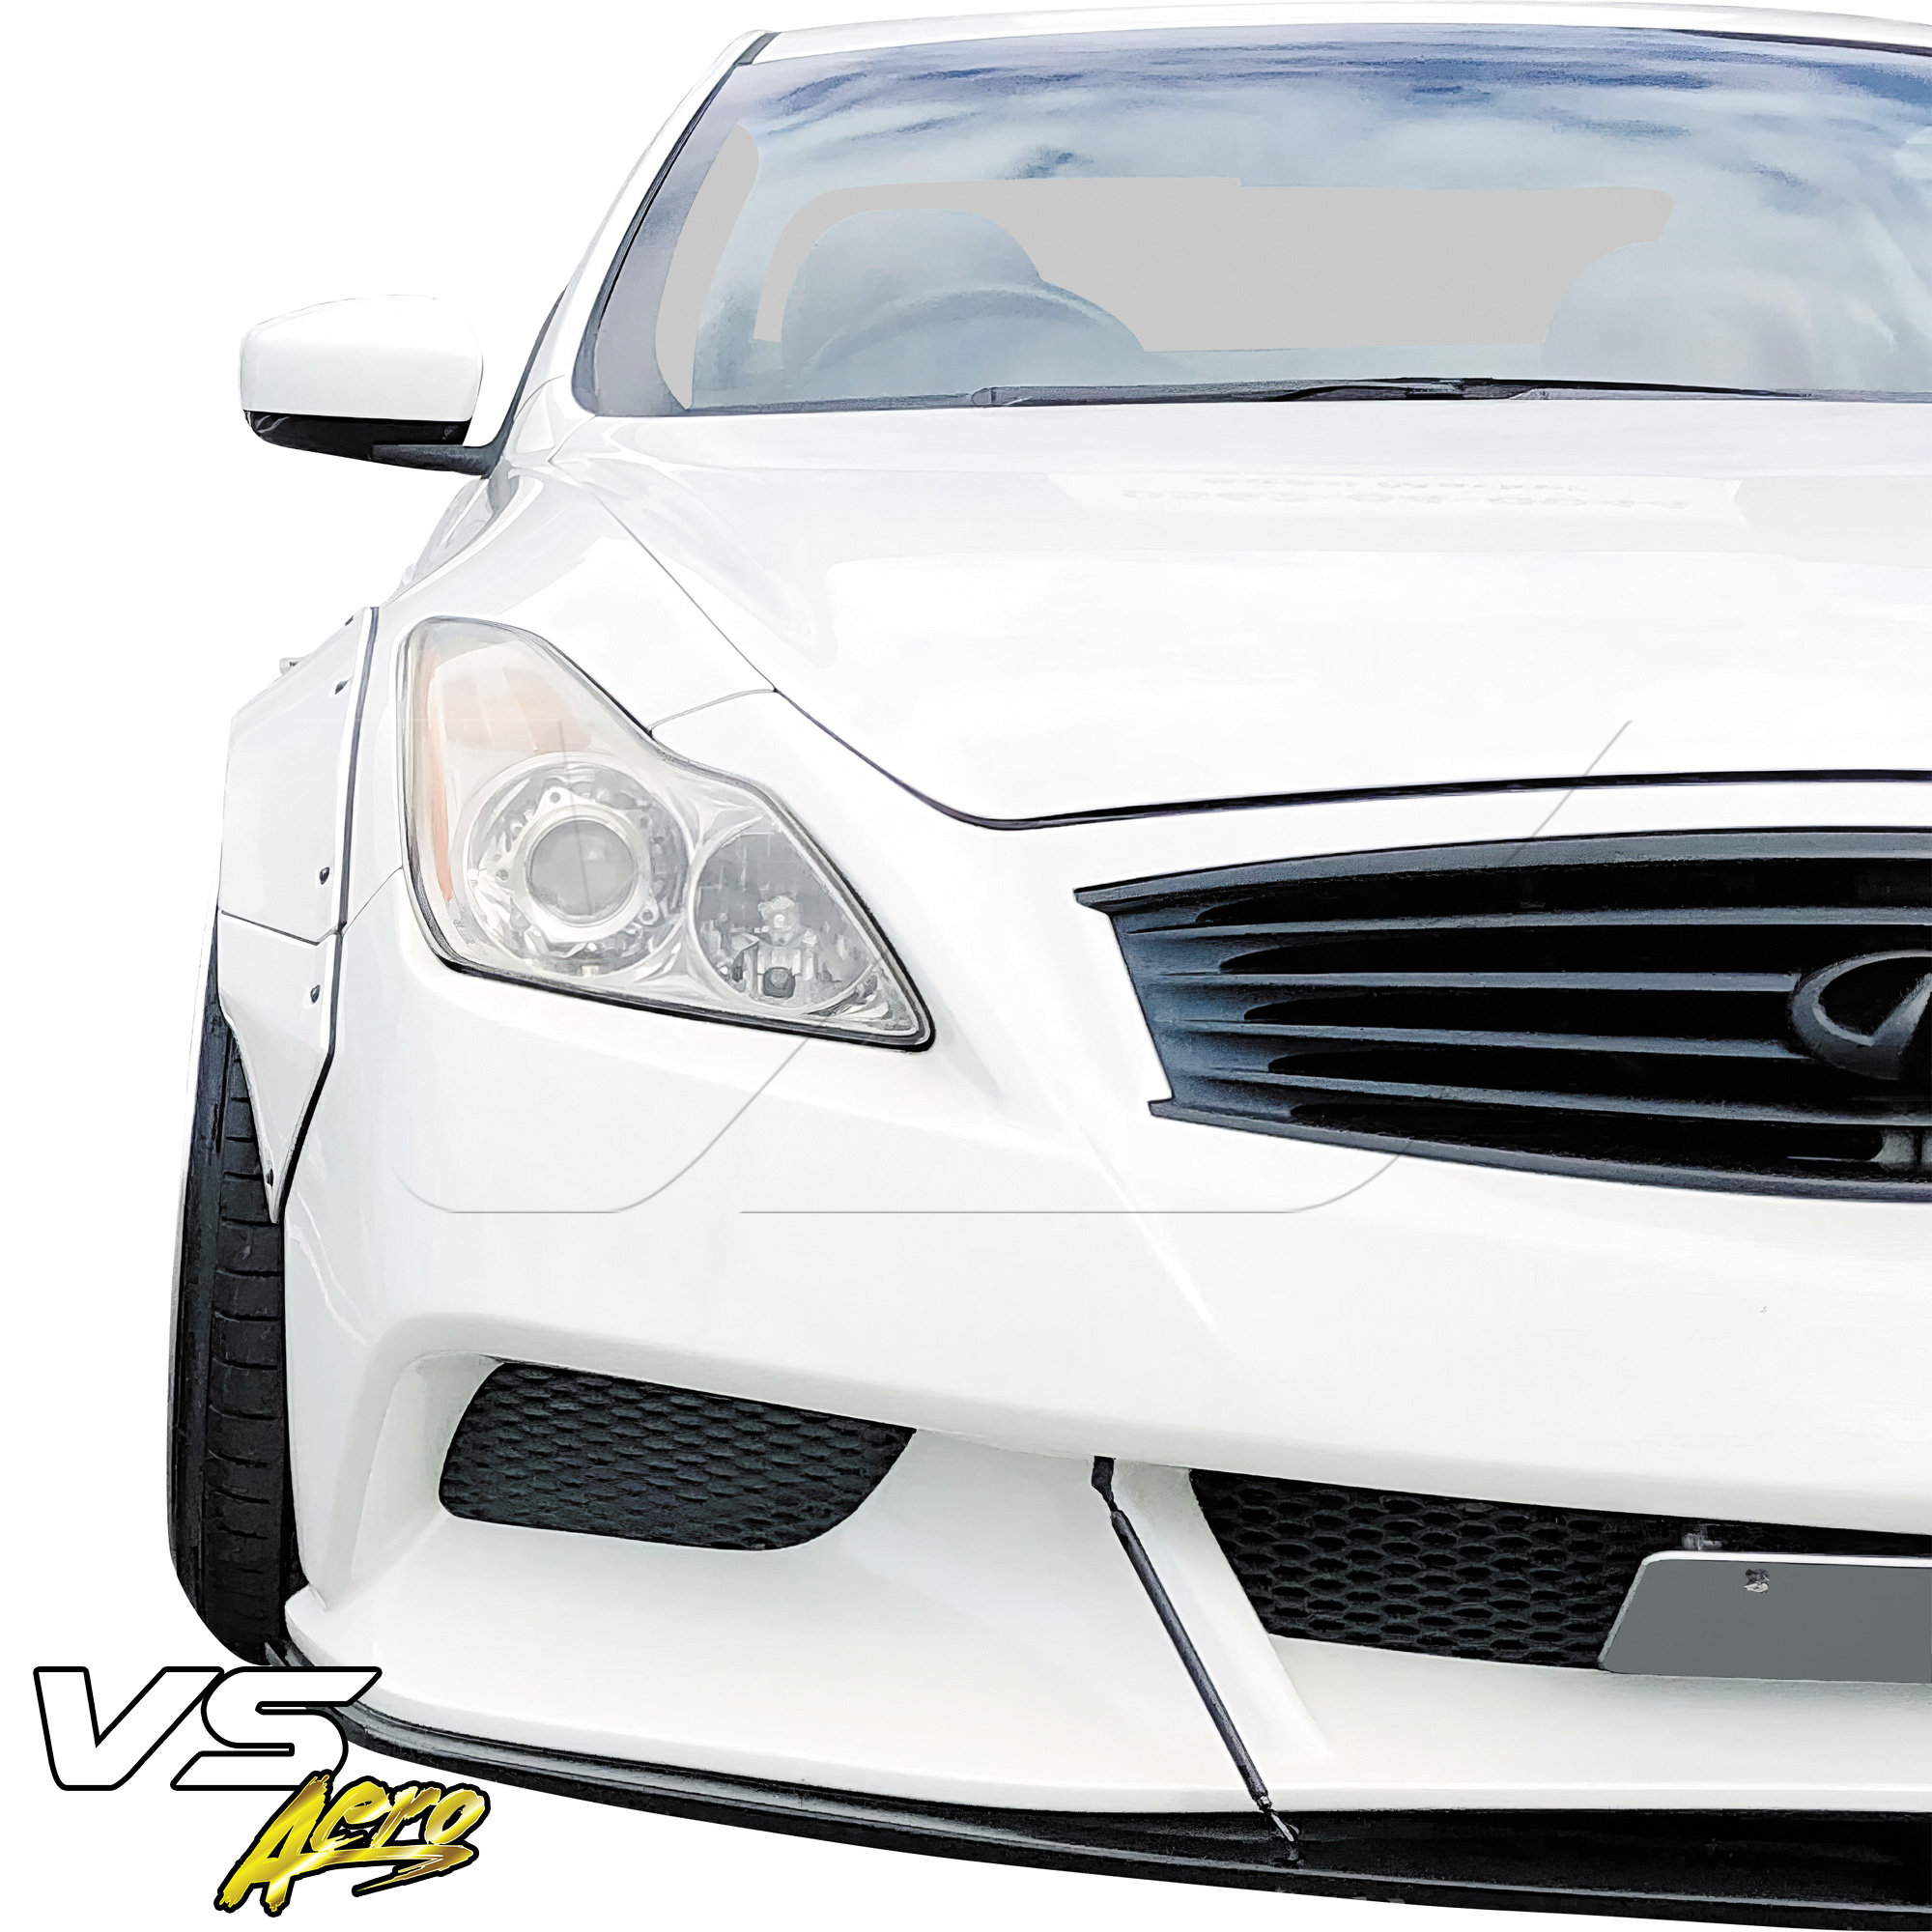 VSaero FRP LBPE Wide Body Fender Flares (front) 4pc > Infiniti G37 Coupe 2008-2015 > 2dr Coupe - Image 34